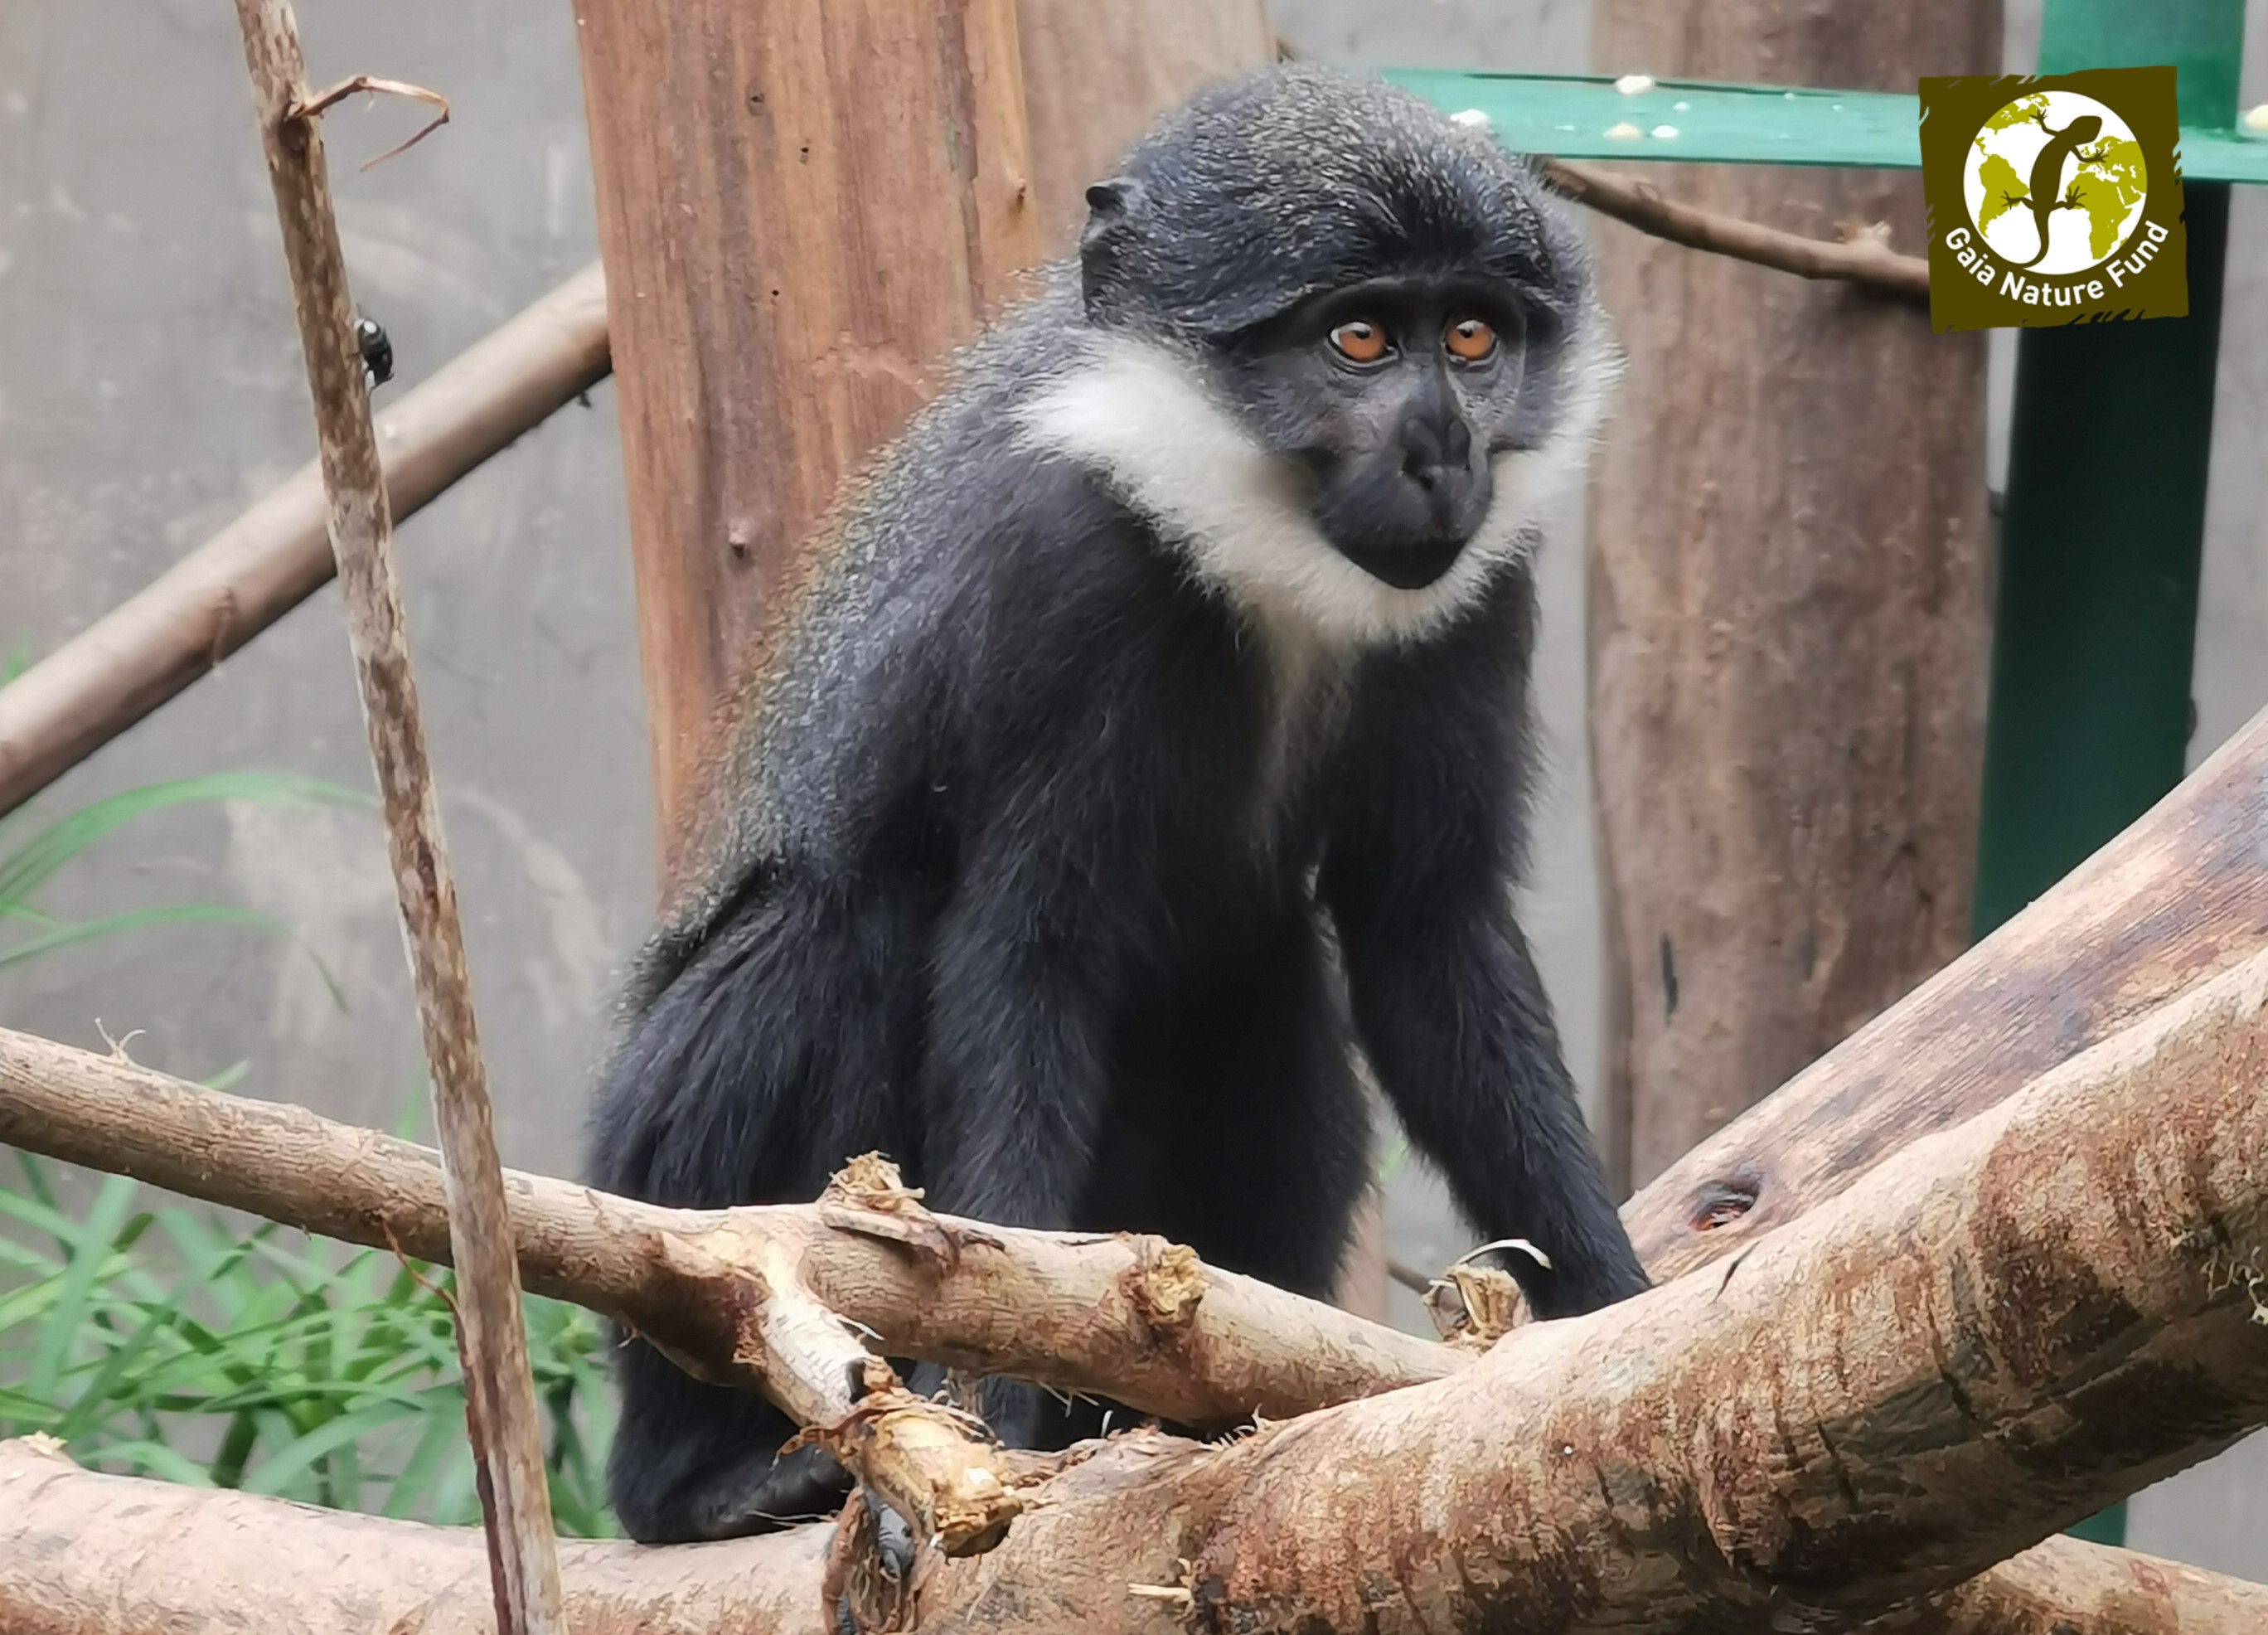 GAIA NATURE FUND offer new outside facilities for the cercopithecus